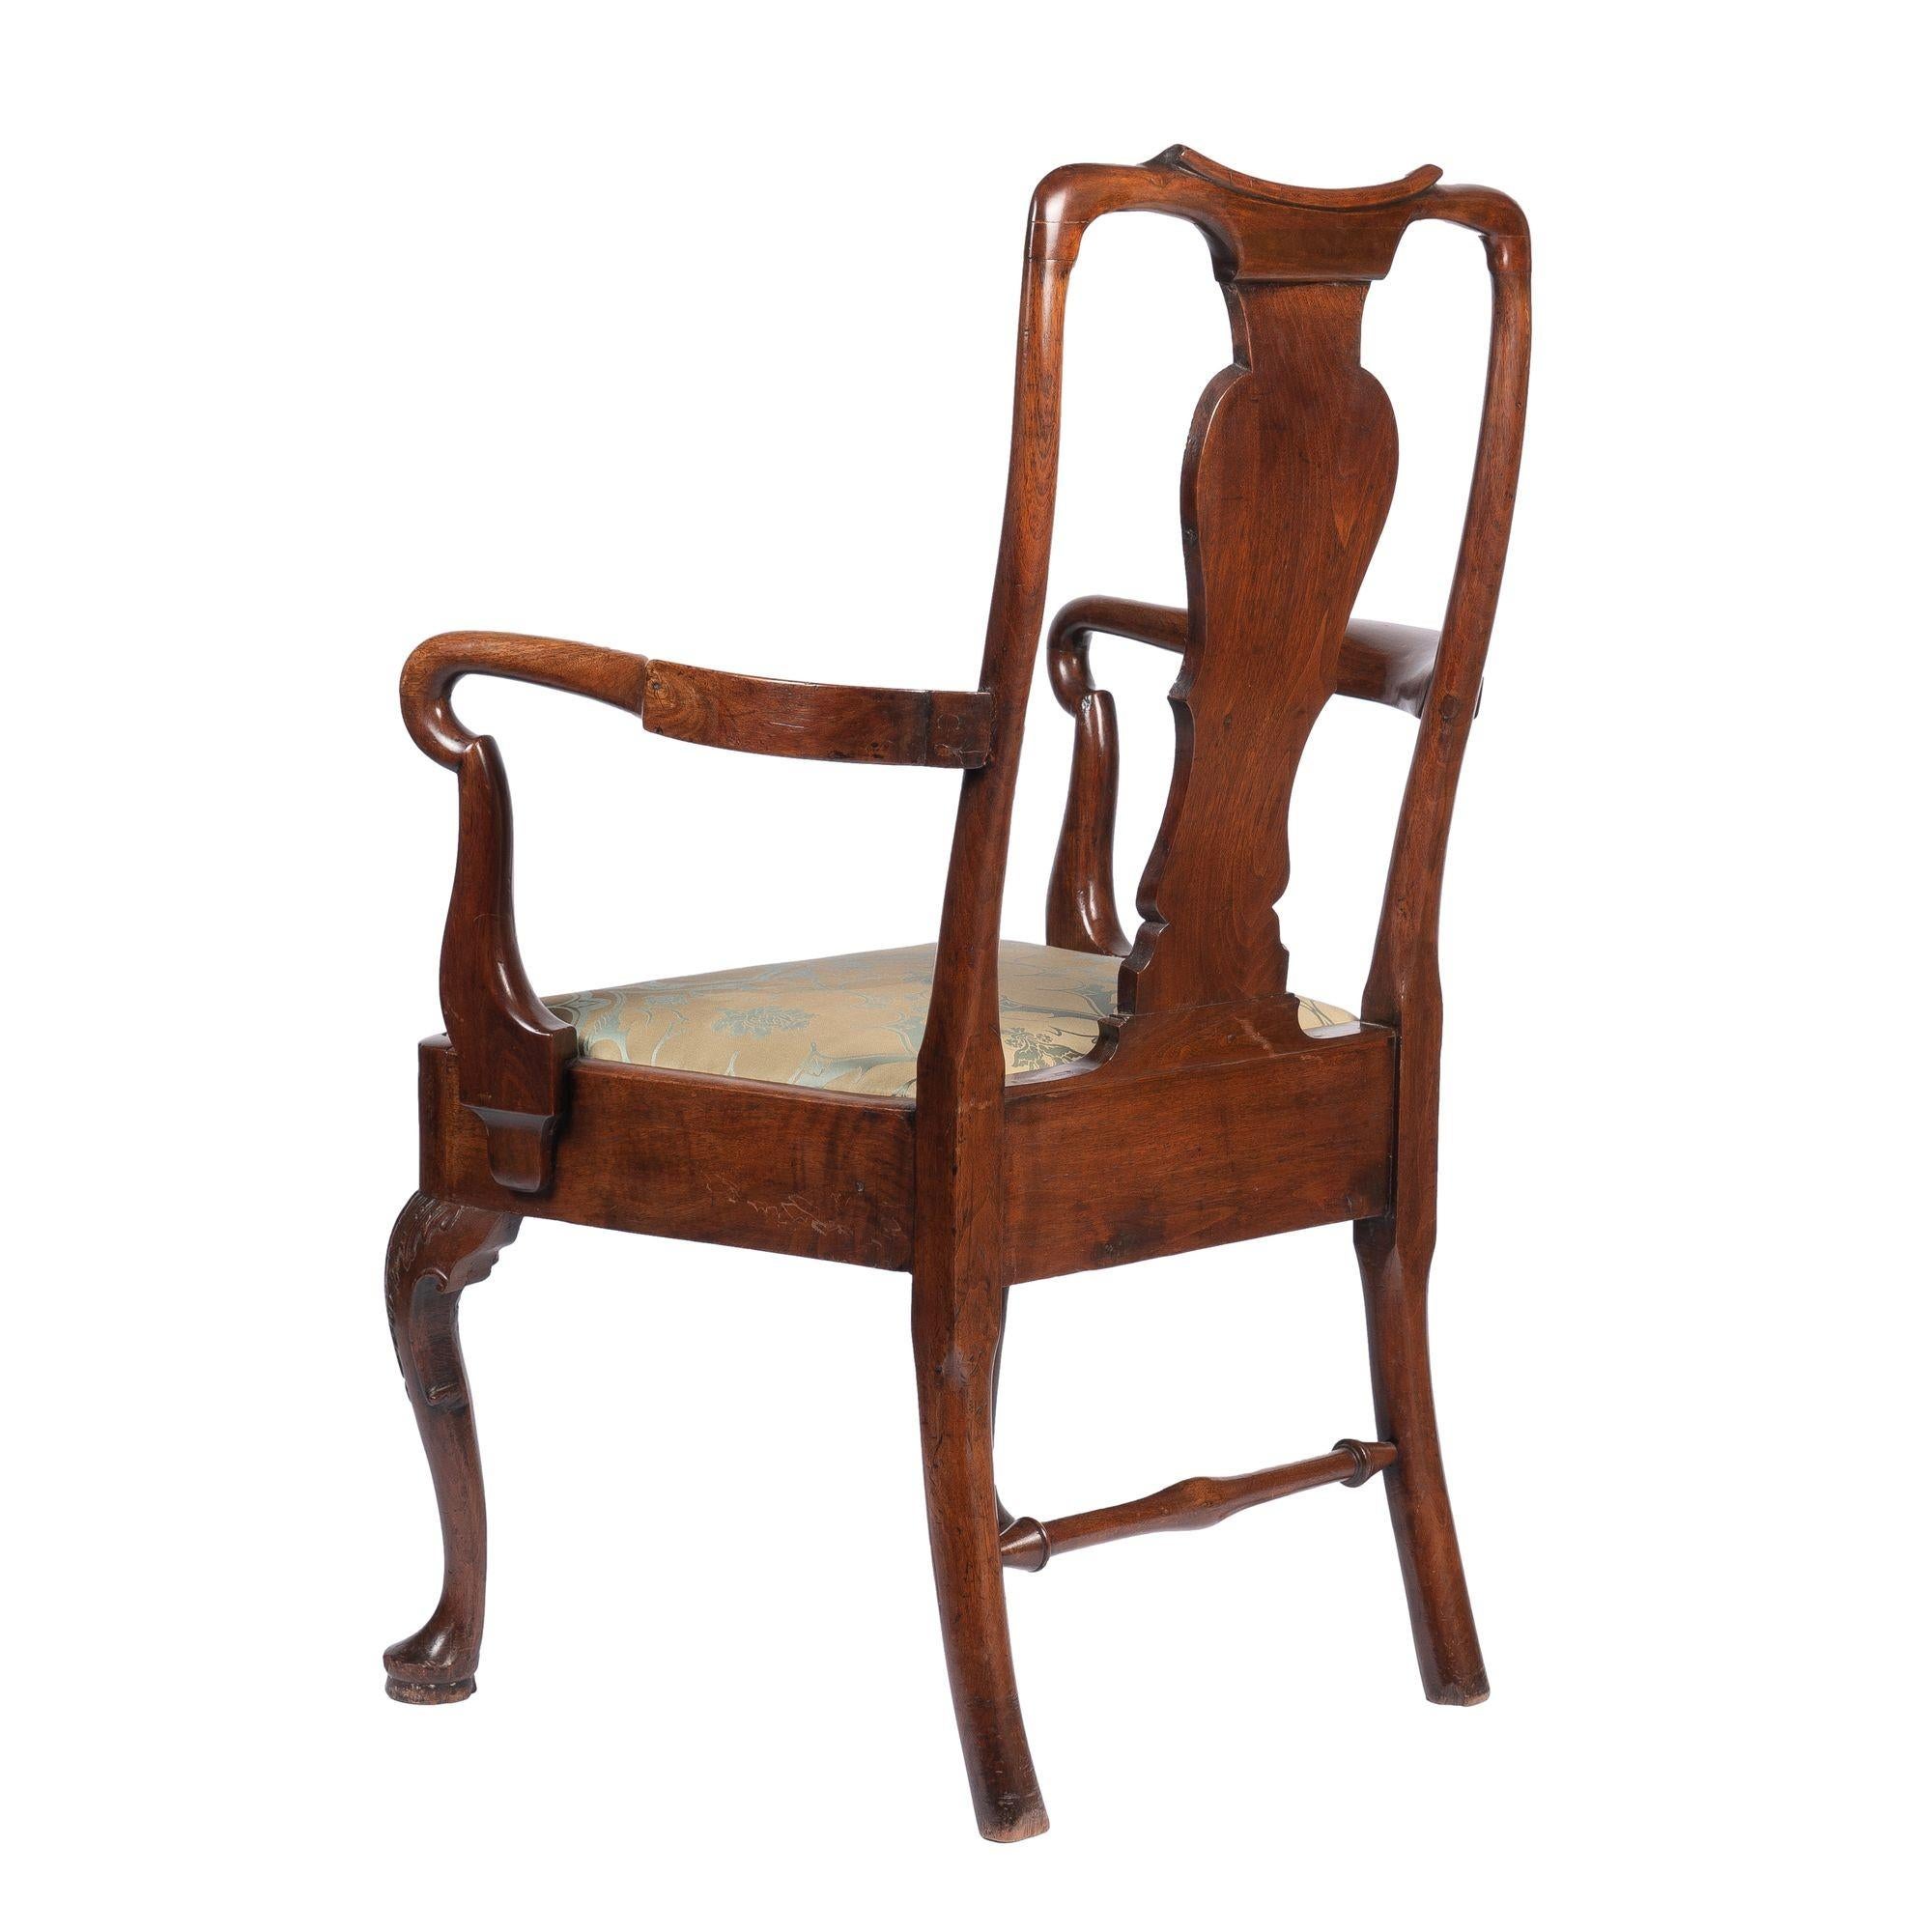 English Georgian Mahogany Armchair with Upholstered Slip Seat, c. 1720 In Good Condition For Sale In Kenilworth, IL